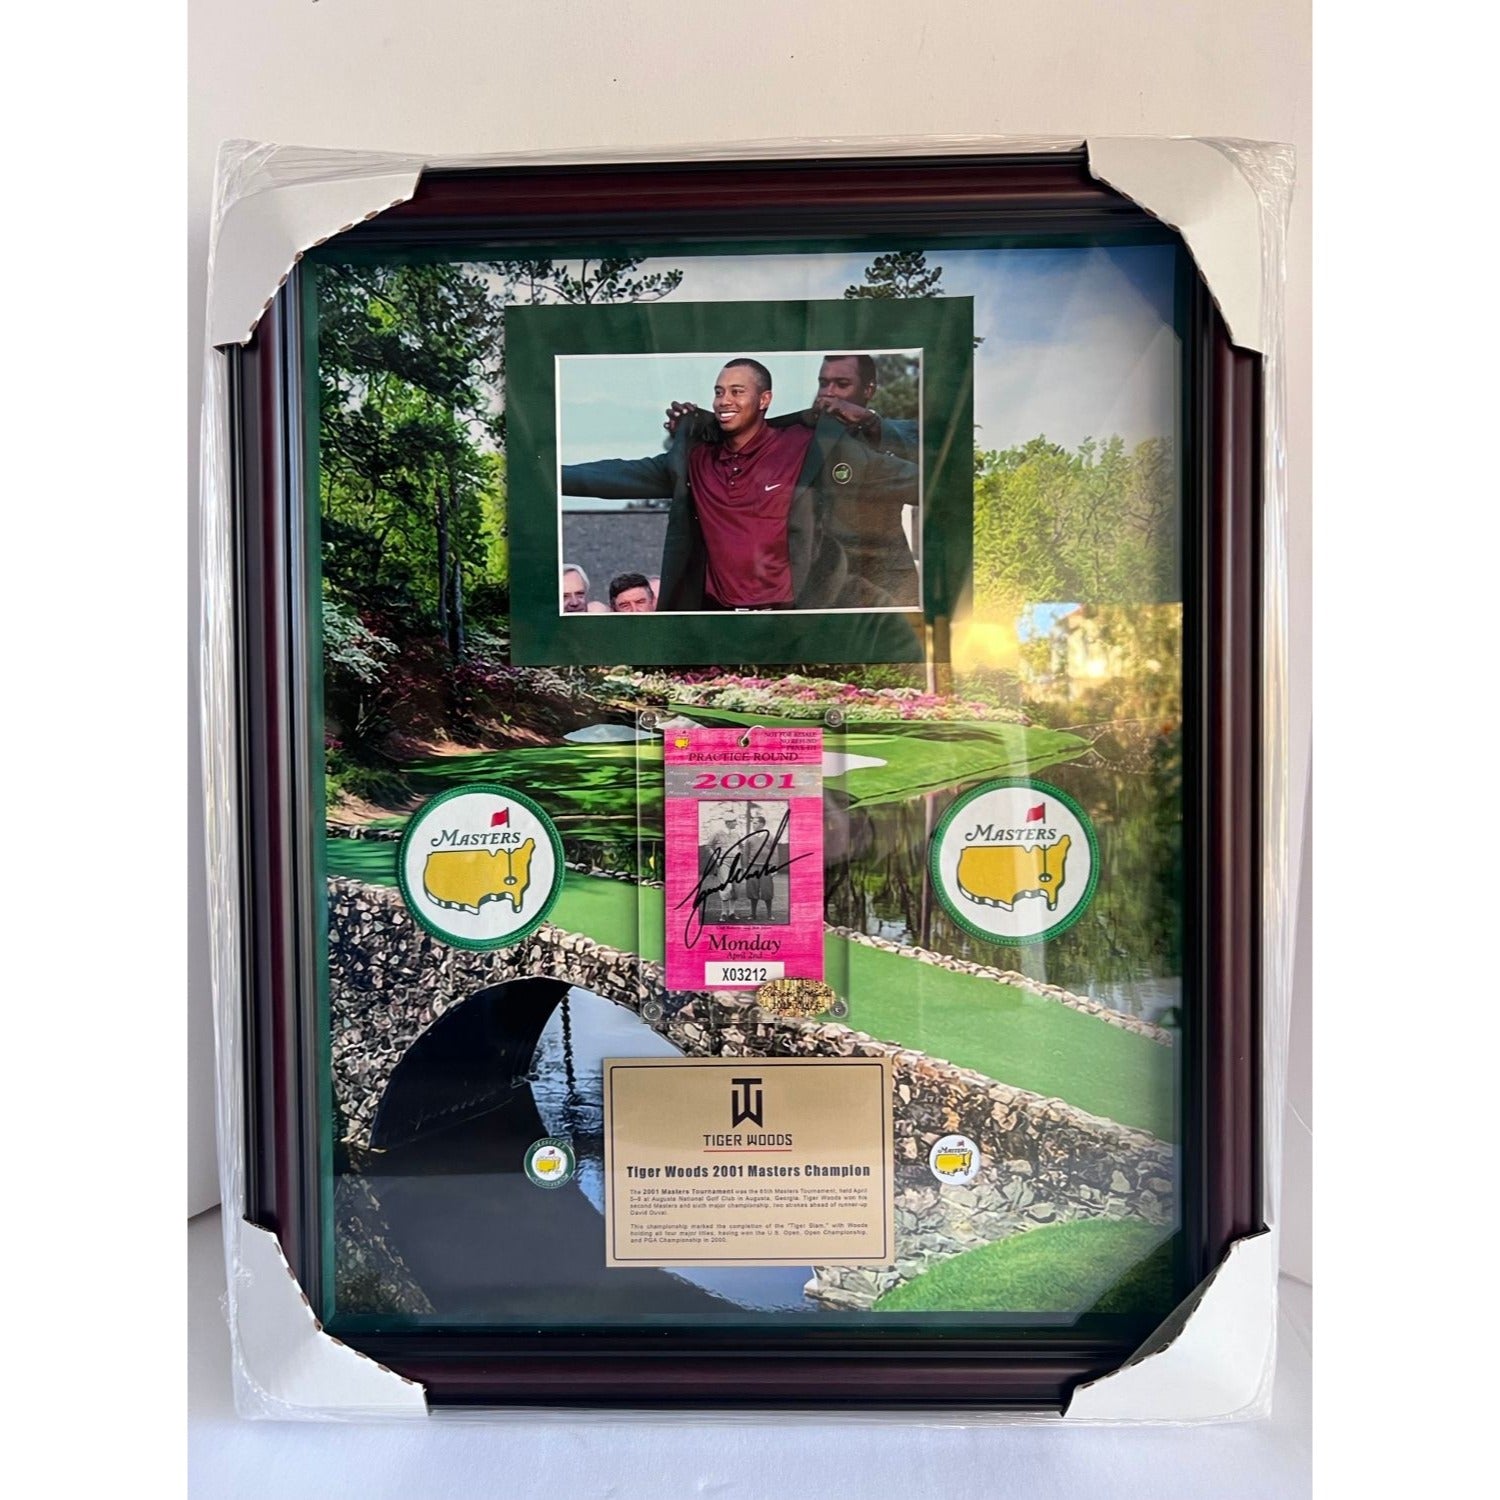 Tiger Woods 2001 full Masters ticket signed and framed with proof 19x23"